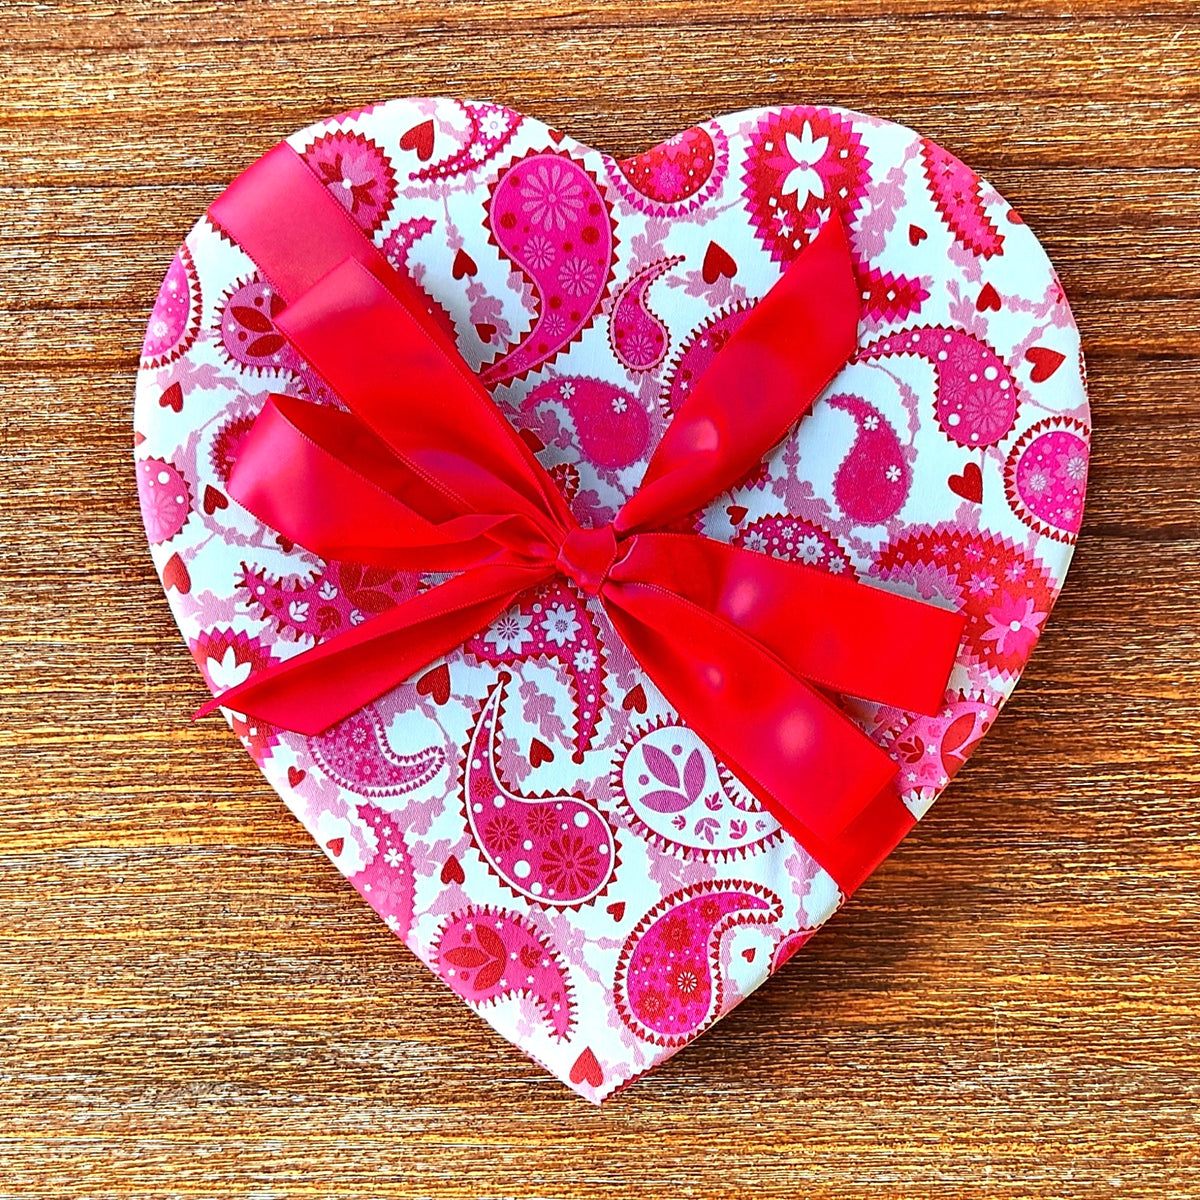 Pink and White Paisley Heart - Assorted Chocolates